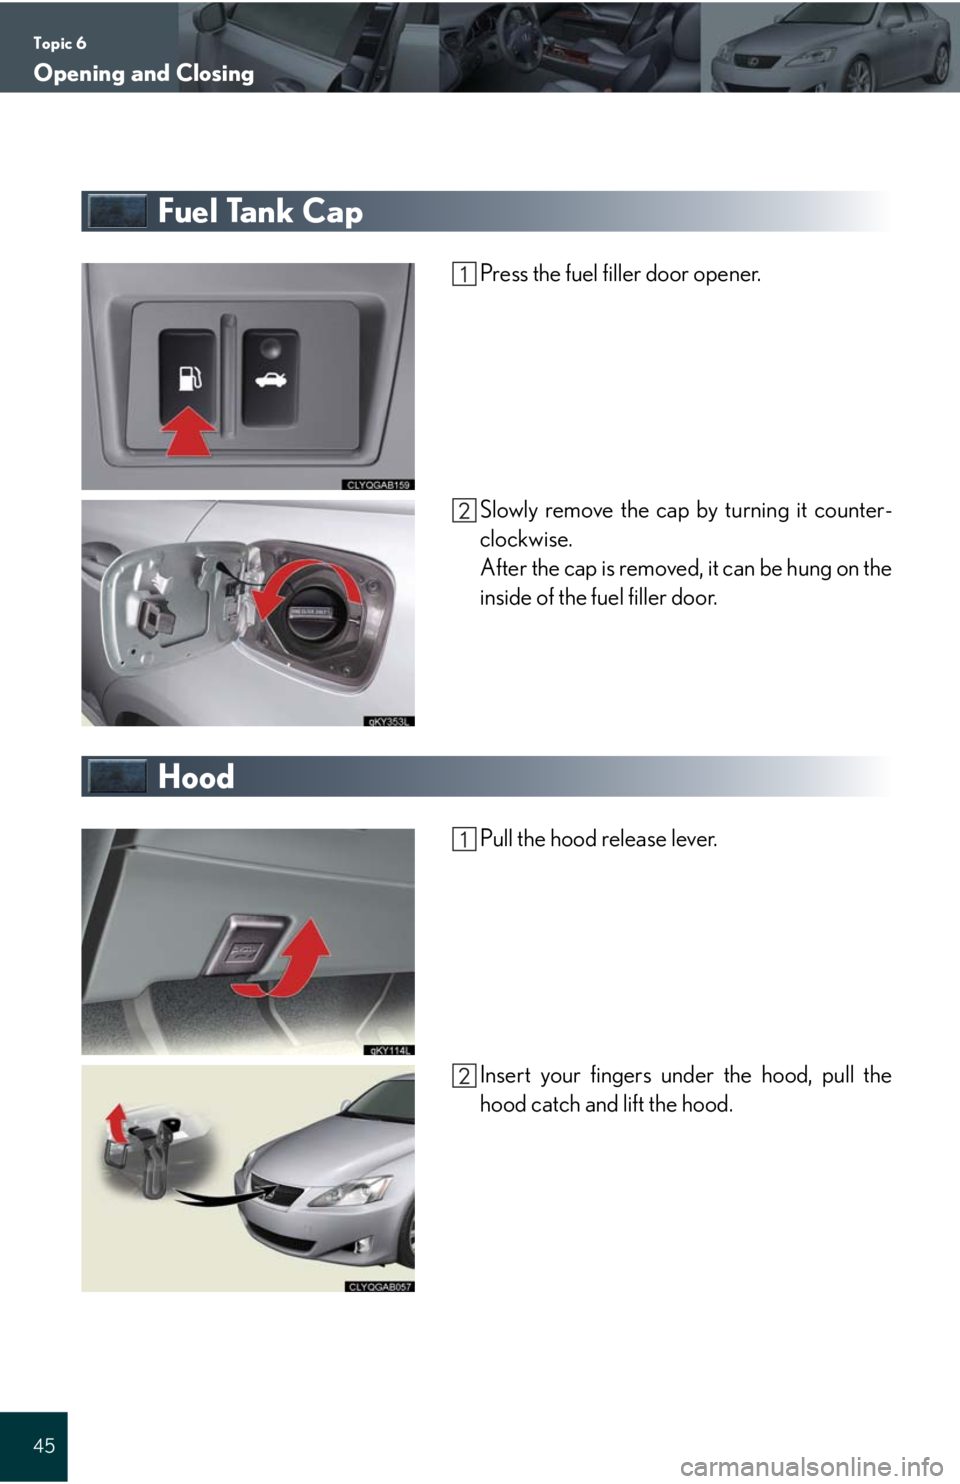 Lexus IS250 2008  Lexus Parking Assist-sensor / LEXUS 2008 IS 350/250 QUICK GUIDE OWNERS MANUAL (OM60D81U) Topic 6
Opening and Closing
45
Fuel Tank Cap
Press the fuel filler door opener.
Slowly remove the cap by turning it counter-
clockwise.
After the cap is removed, it can be hung on the
inside of the fu